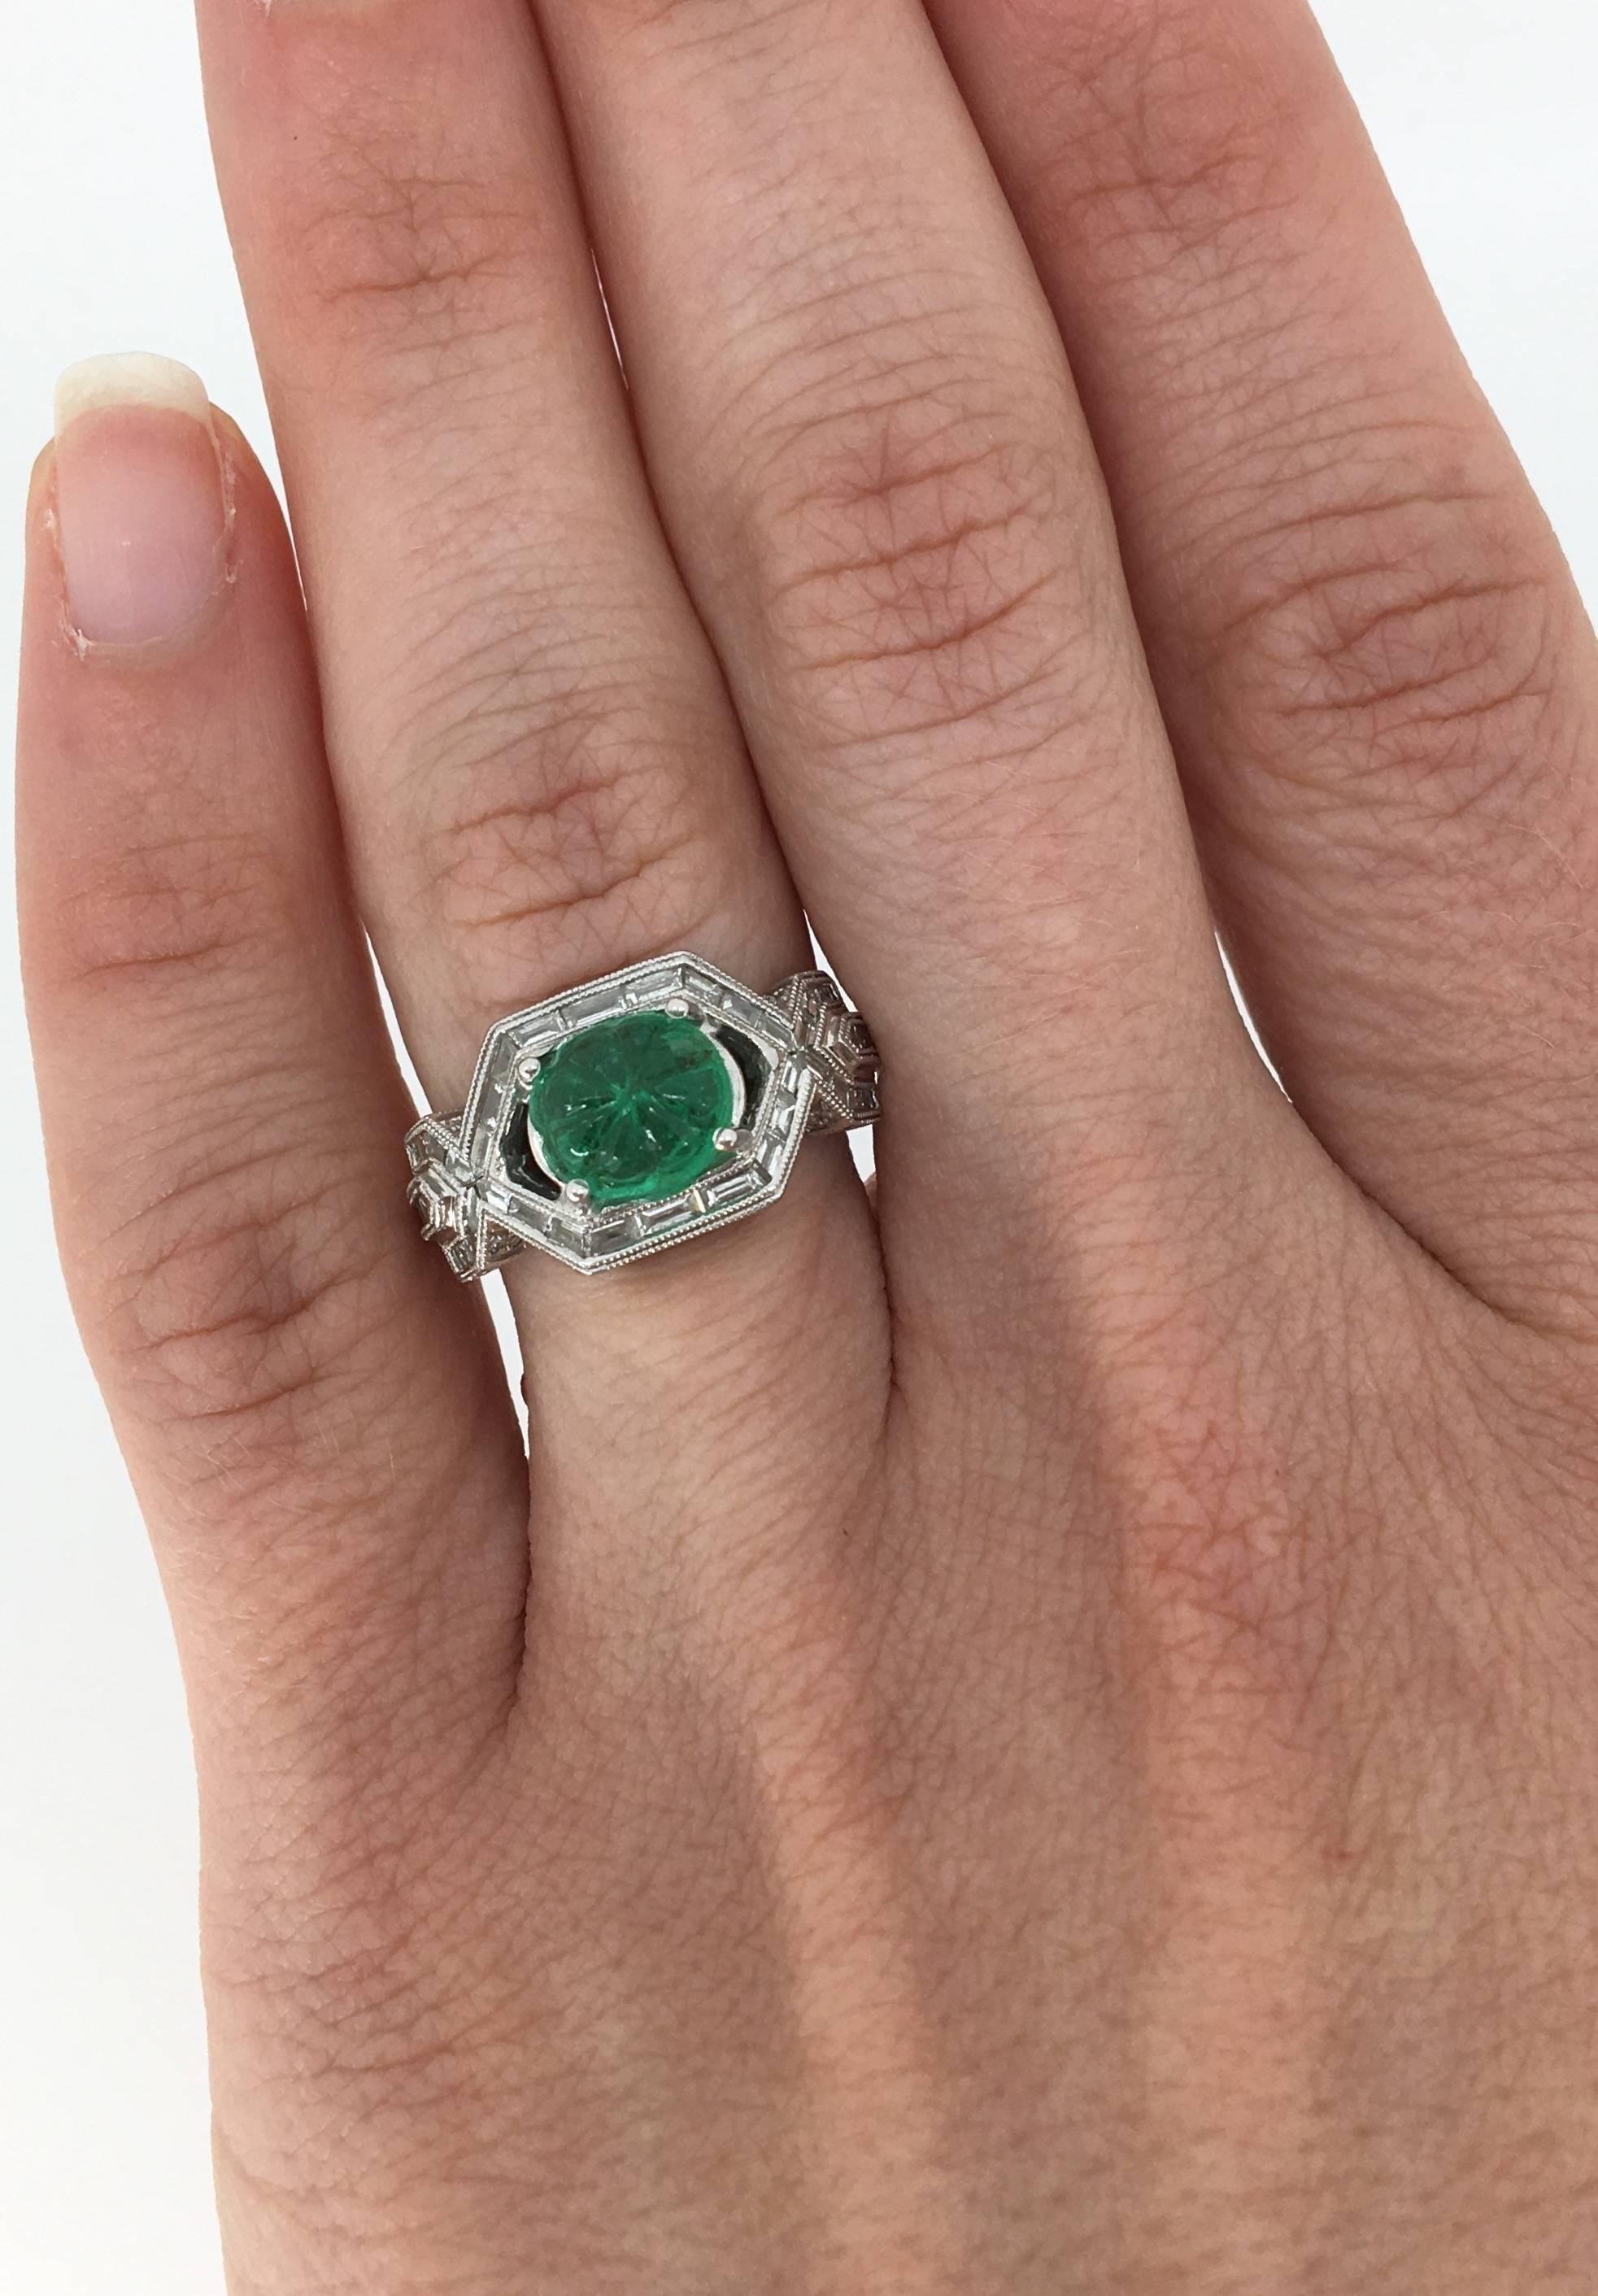 This unique ring features a beautiful 7.7MM X 6.8MM carved emerald in the center. The emerald is accented with 42 Baguette Cut Diamonds and 86 Round Brilliant Cut Diamonds set into a custom setting. The diamonds have G-I color and I-VS clarity. The